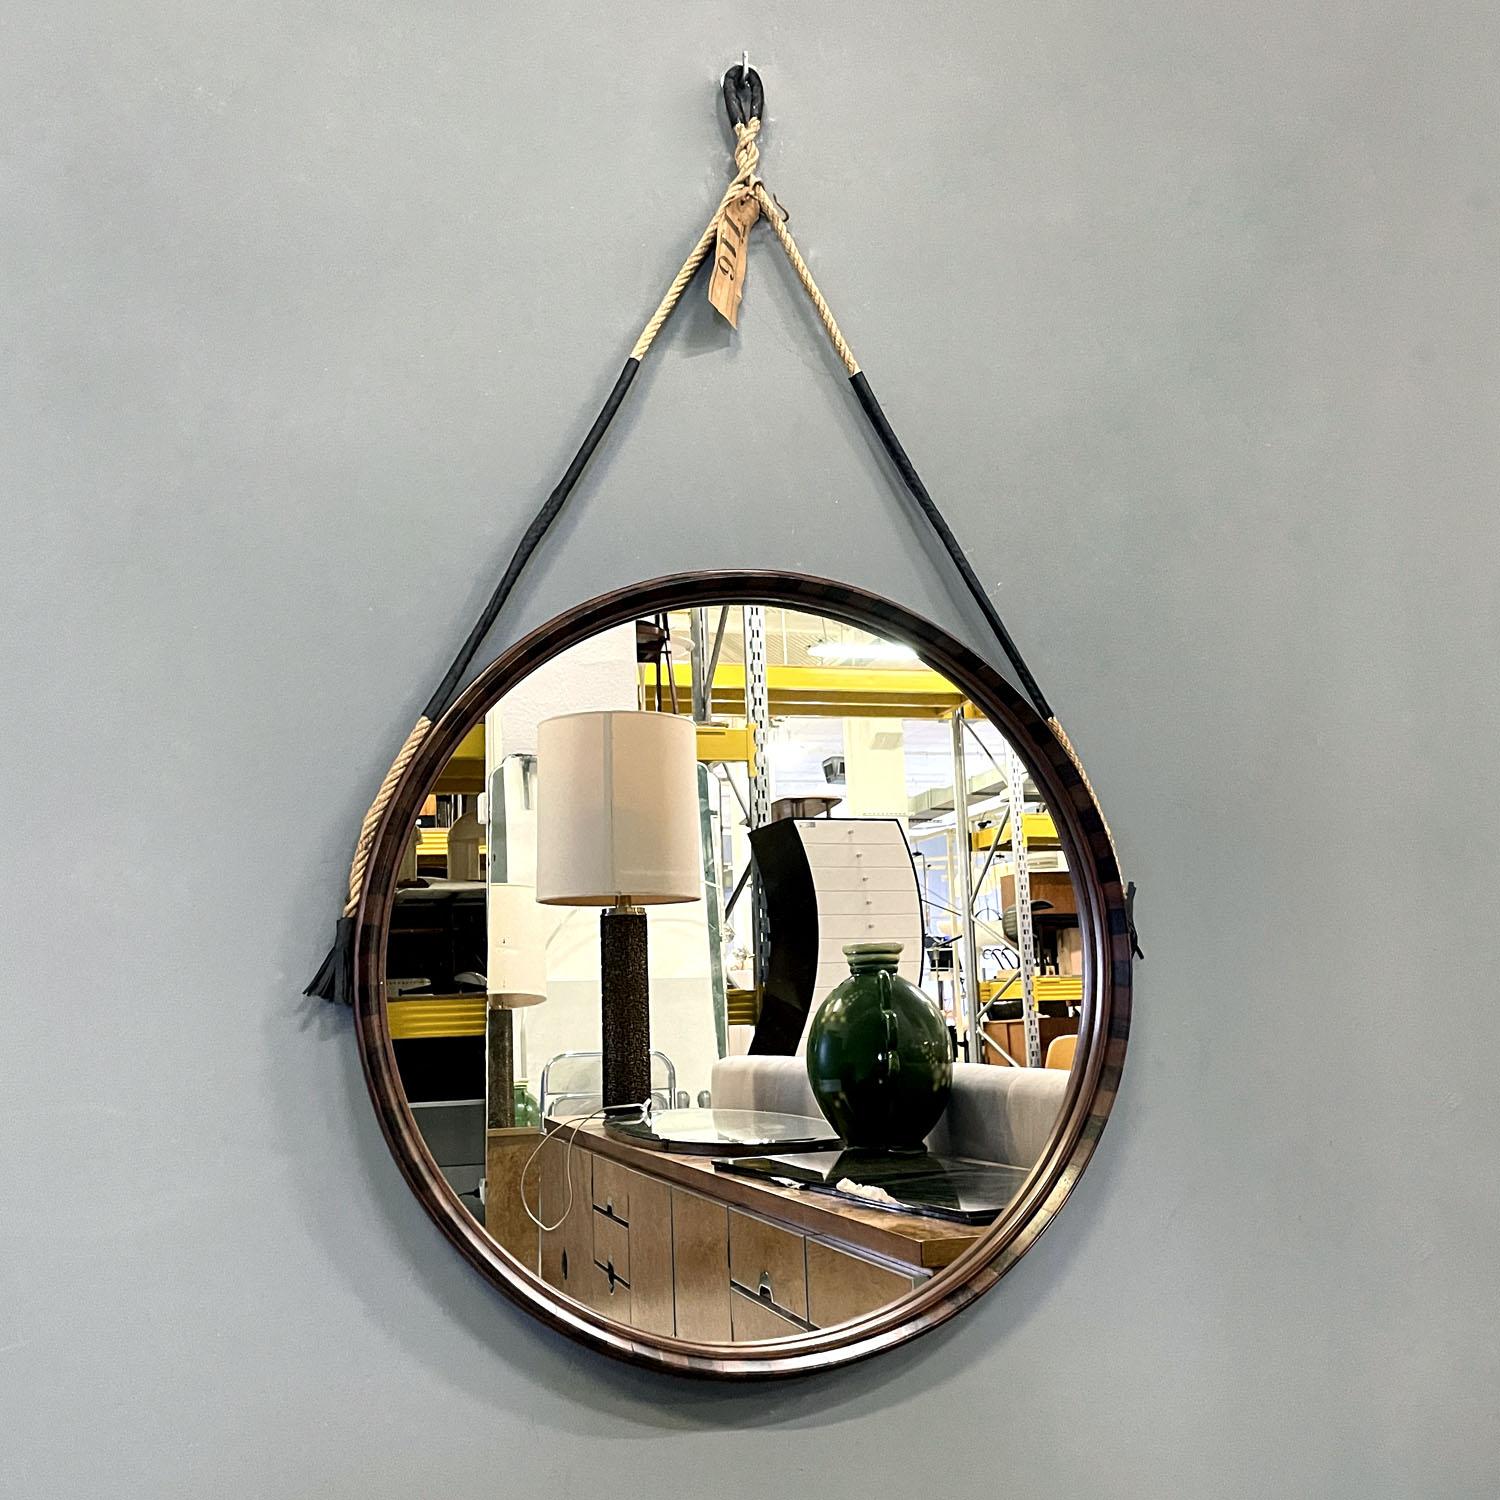 Italian mid-century modern rounded two toned wood wall mirror with rope, 1960s
Round wooden wall mirror. The frame is made up of alternating two woods of different colors to create a regular geometric decoration. The frame is thick and the mirror